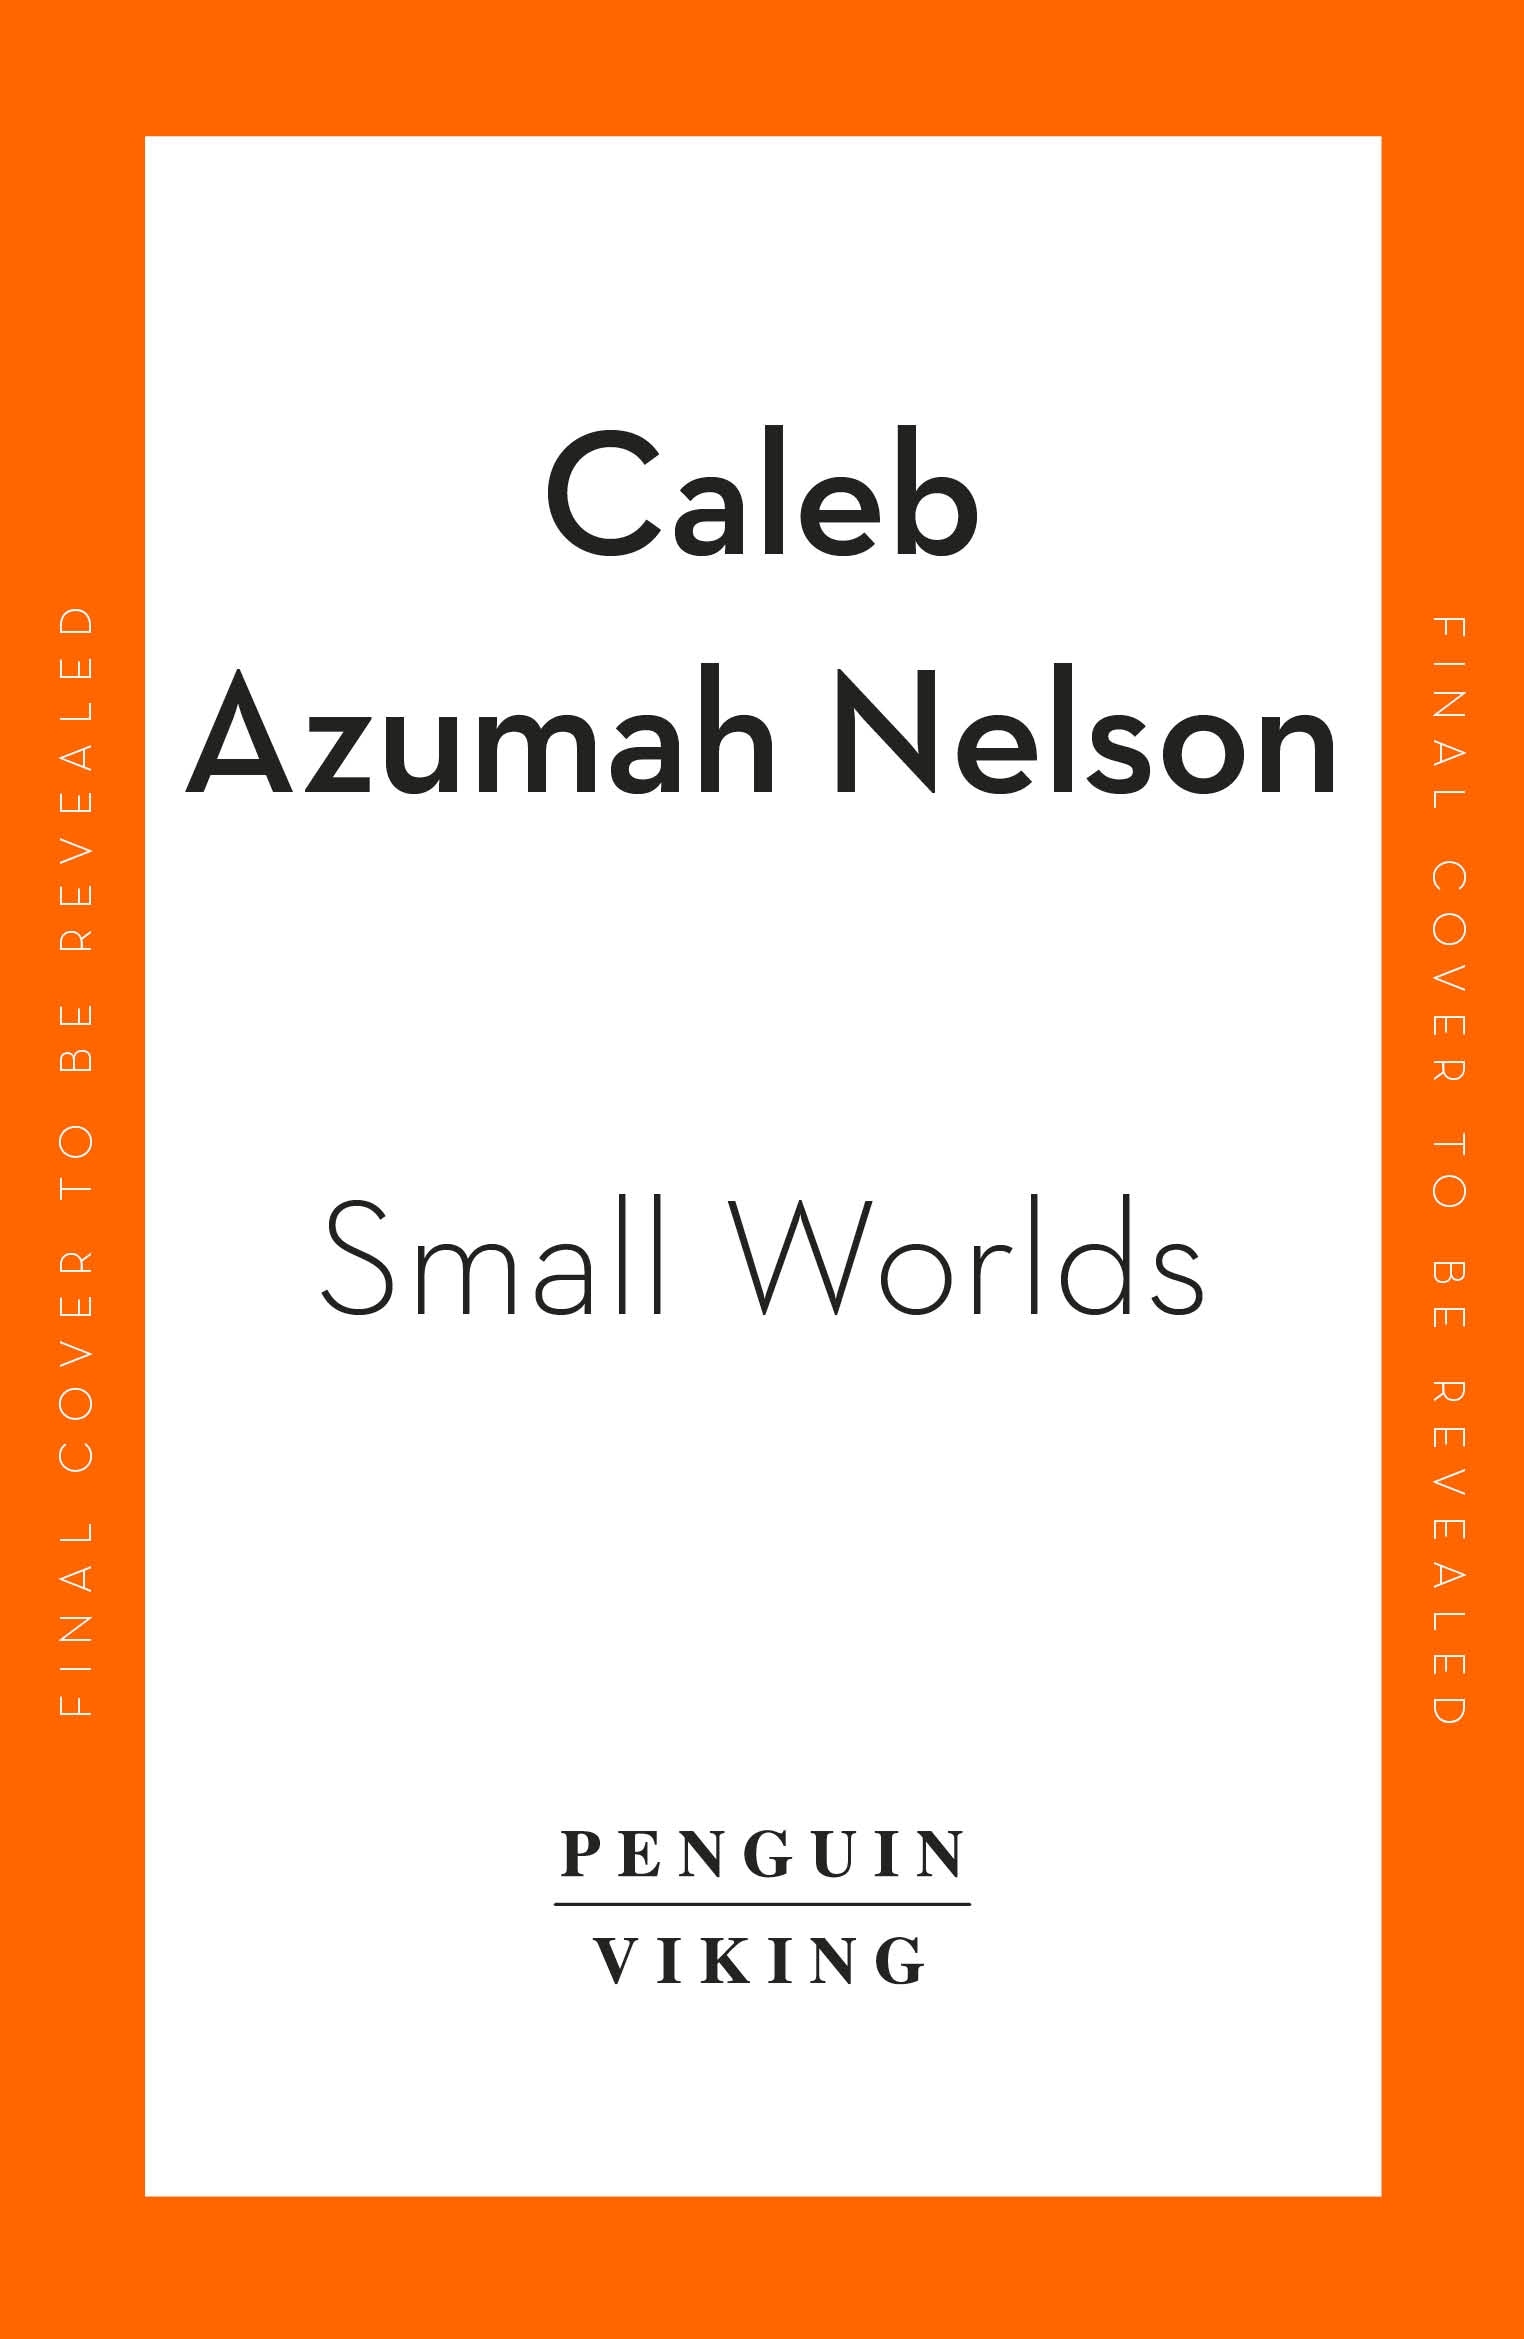 Book “Small Worlds” by Caleb Azumah Nelson — May 11, 2023